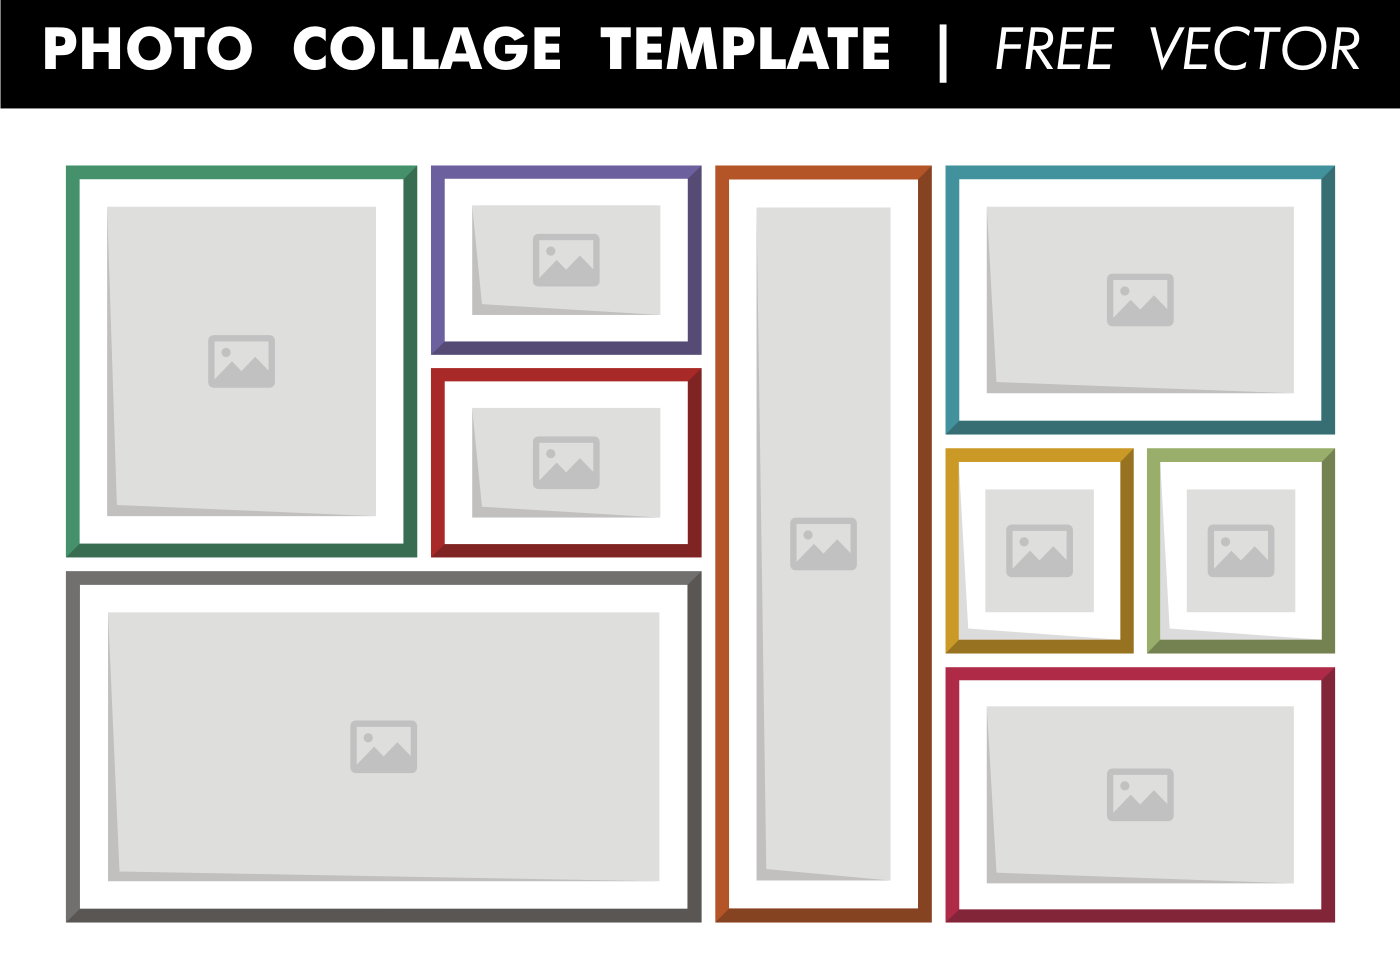 vector free download template - photo #44